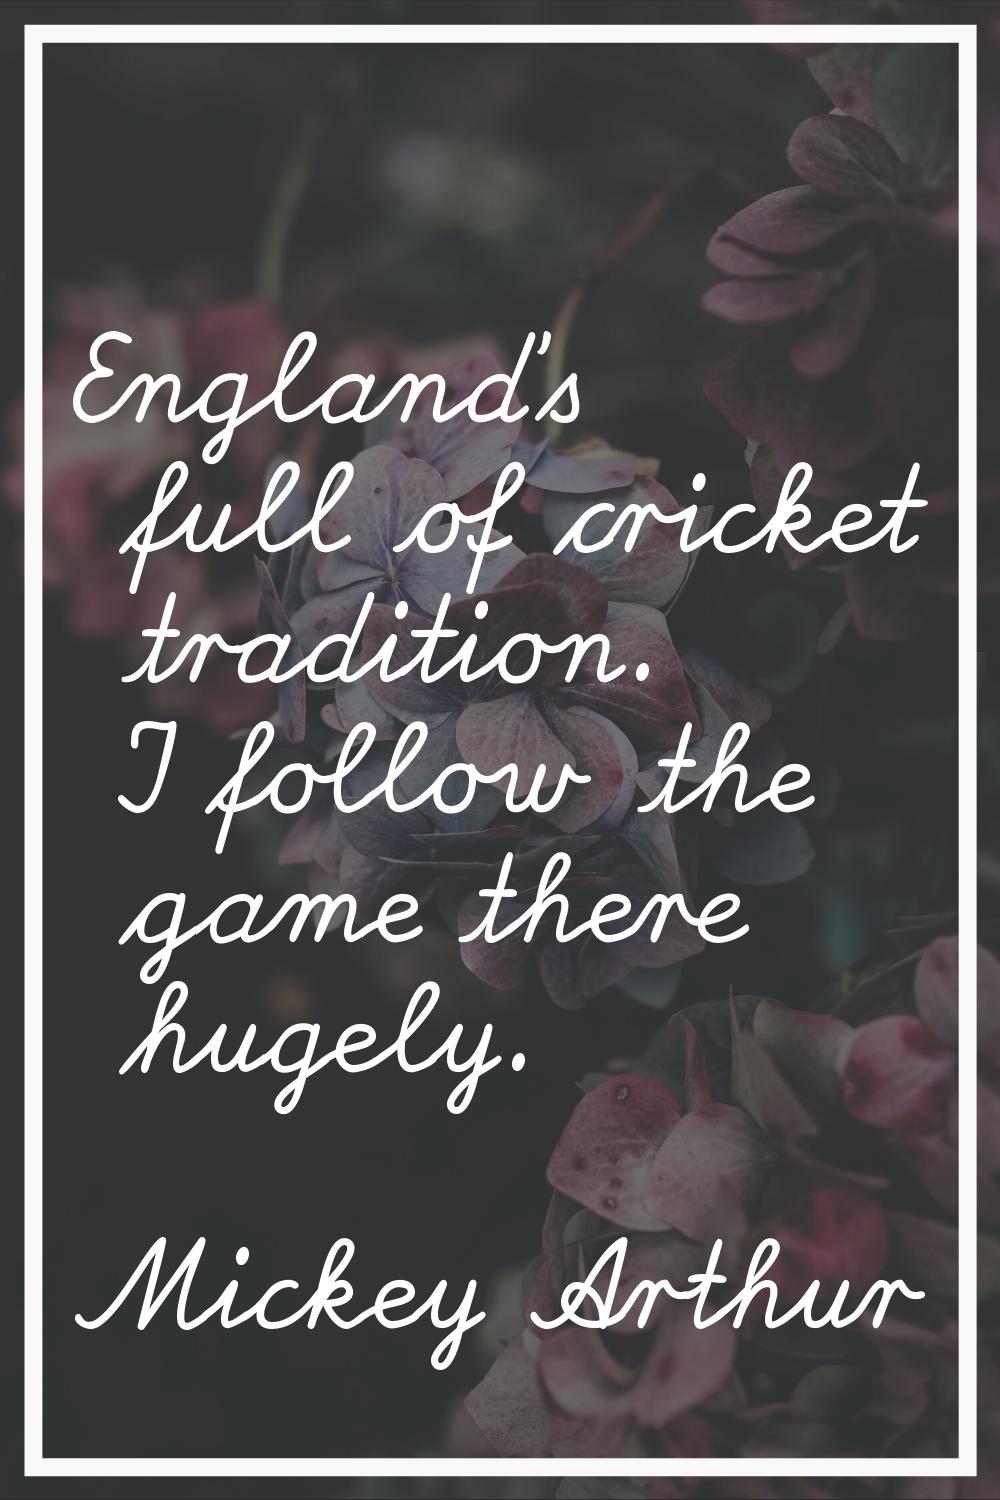 England's full of cricket tradition. I follow the game there hugely.